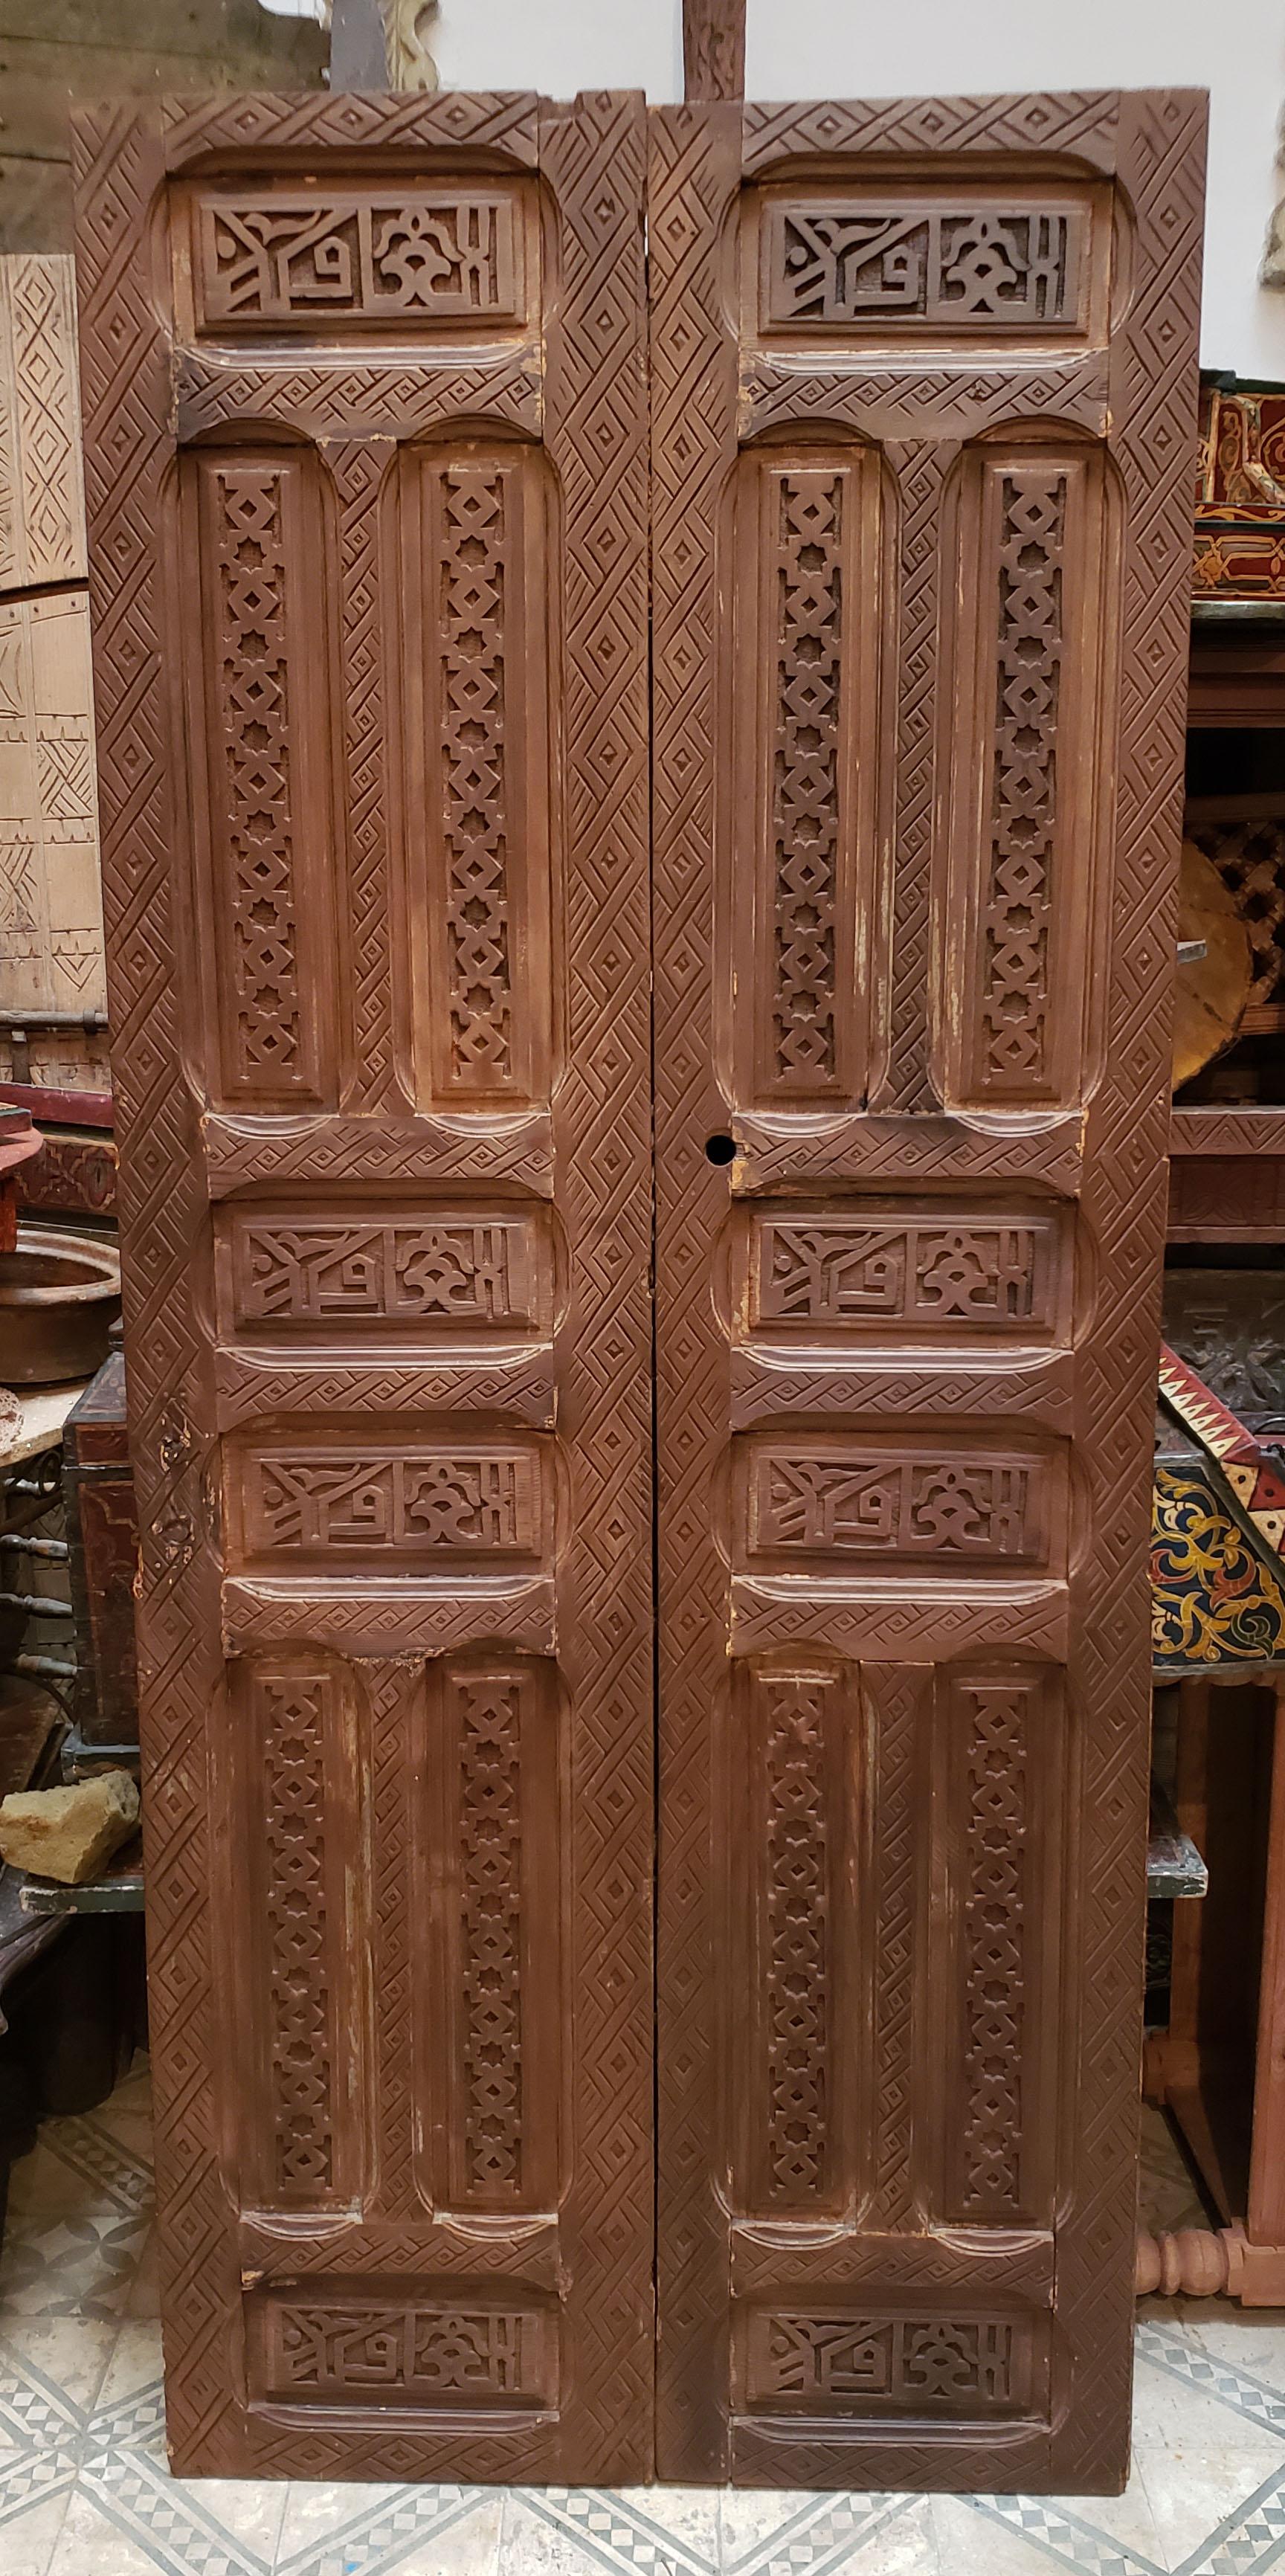 Another amazing double panel Moroccan door measuring approximately 86